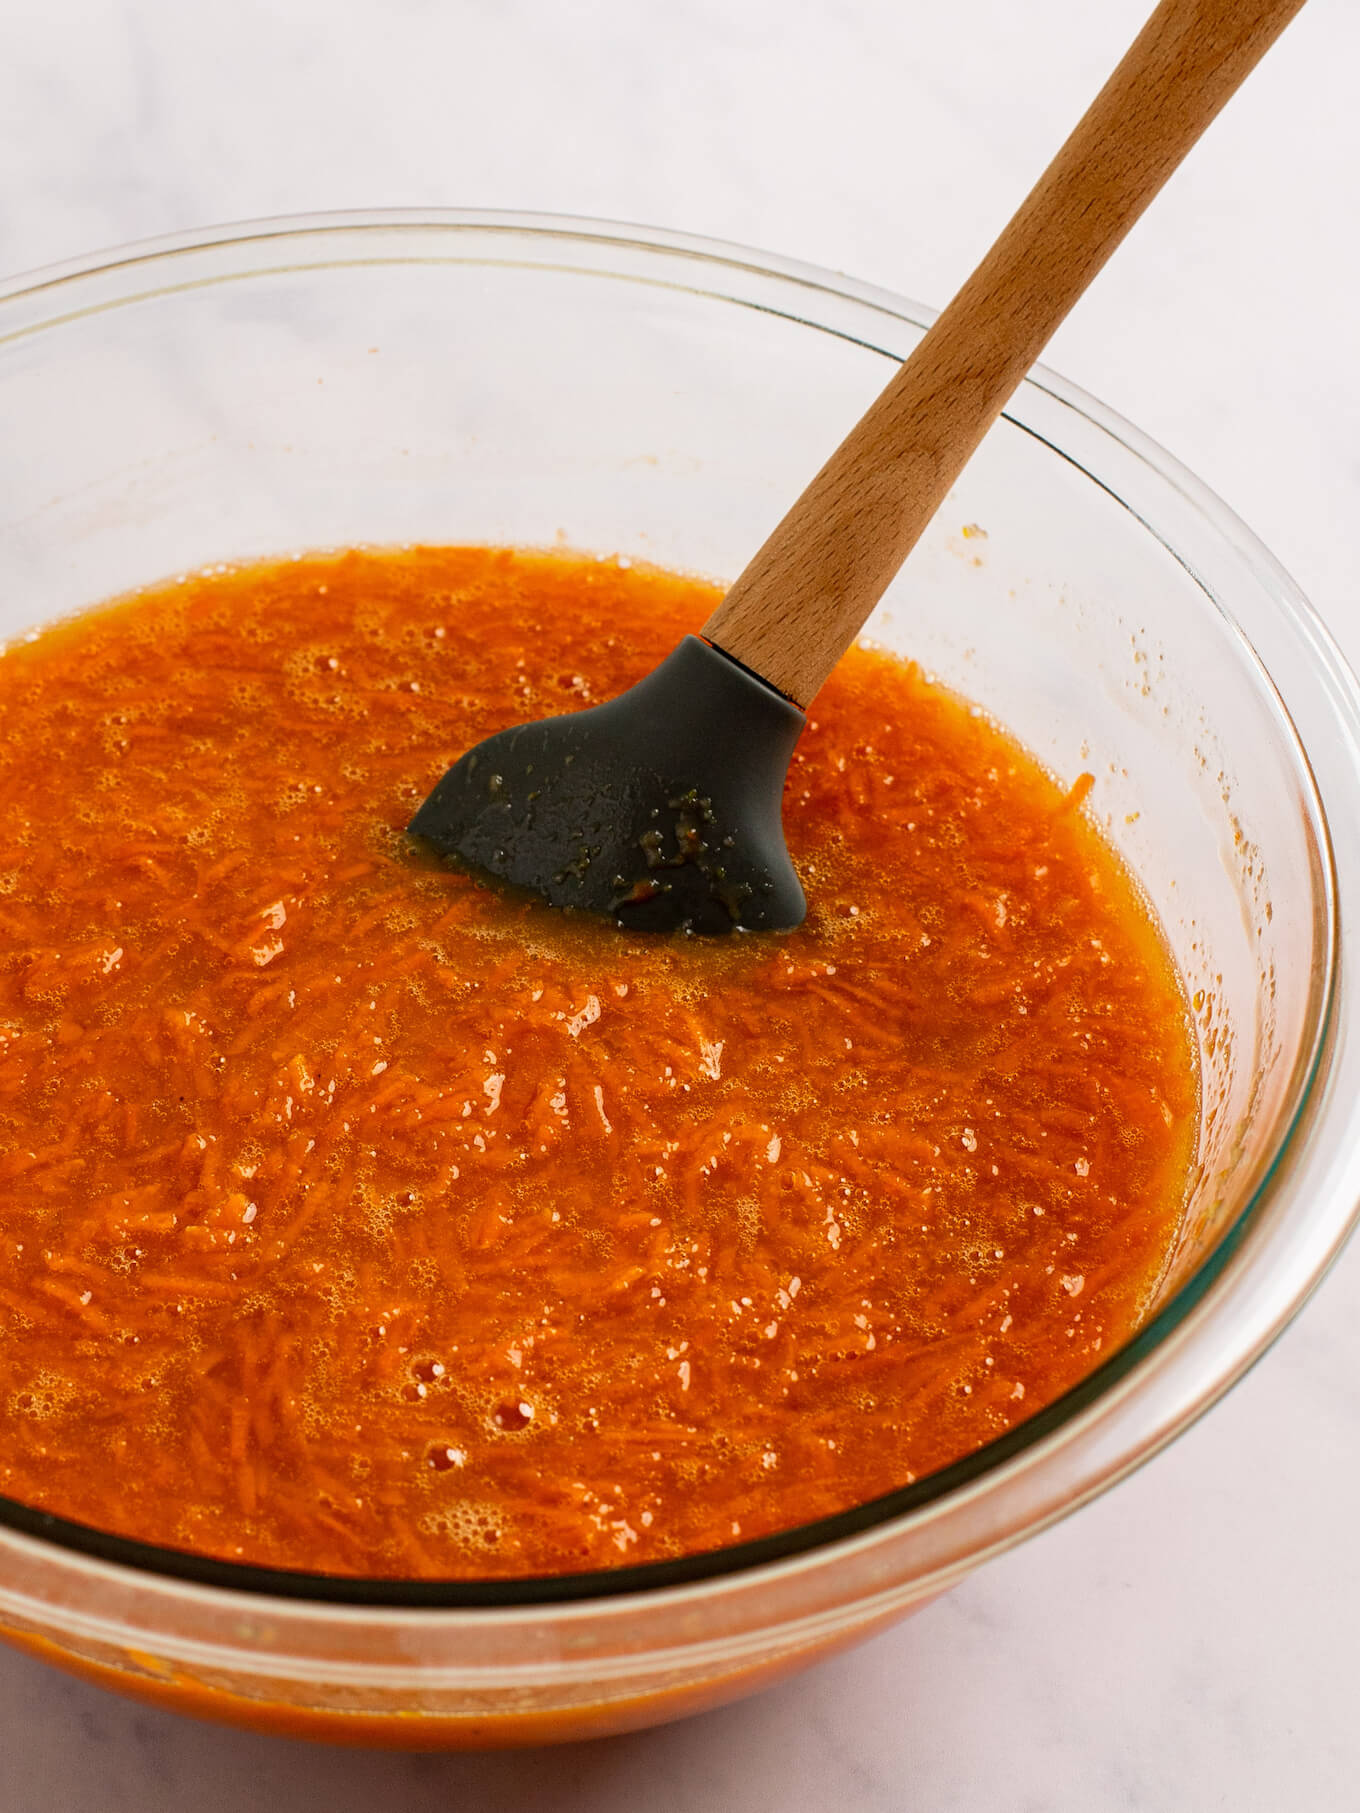 Grated carrots folded into the wet ingredients. A rubber spatula rests on the side of the bowl.